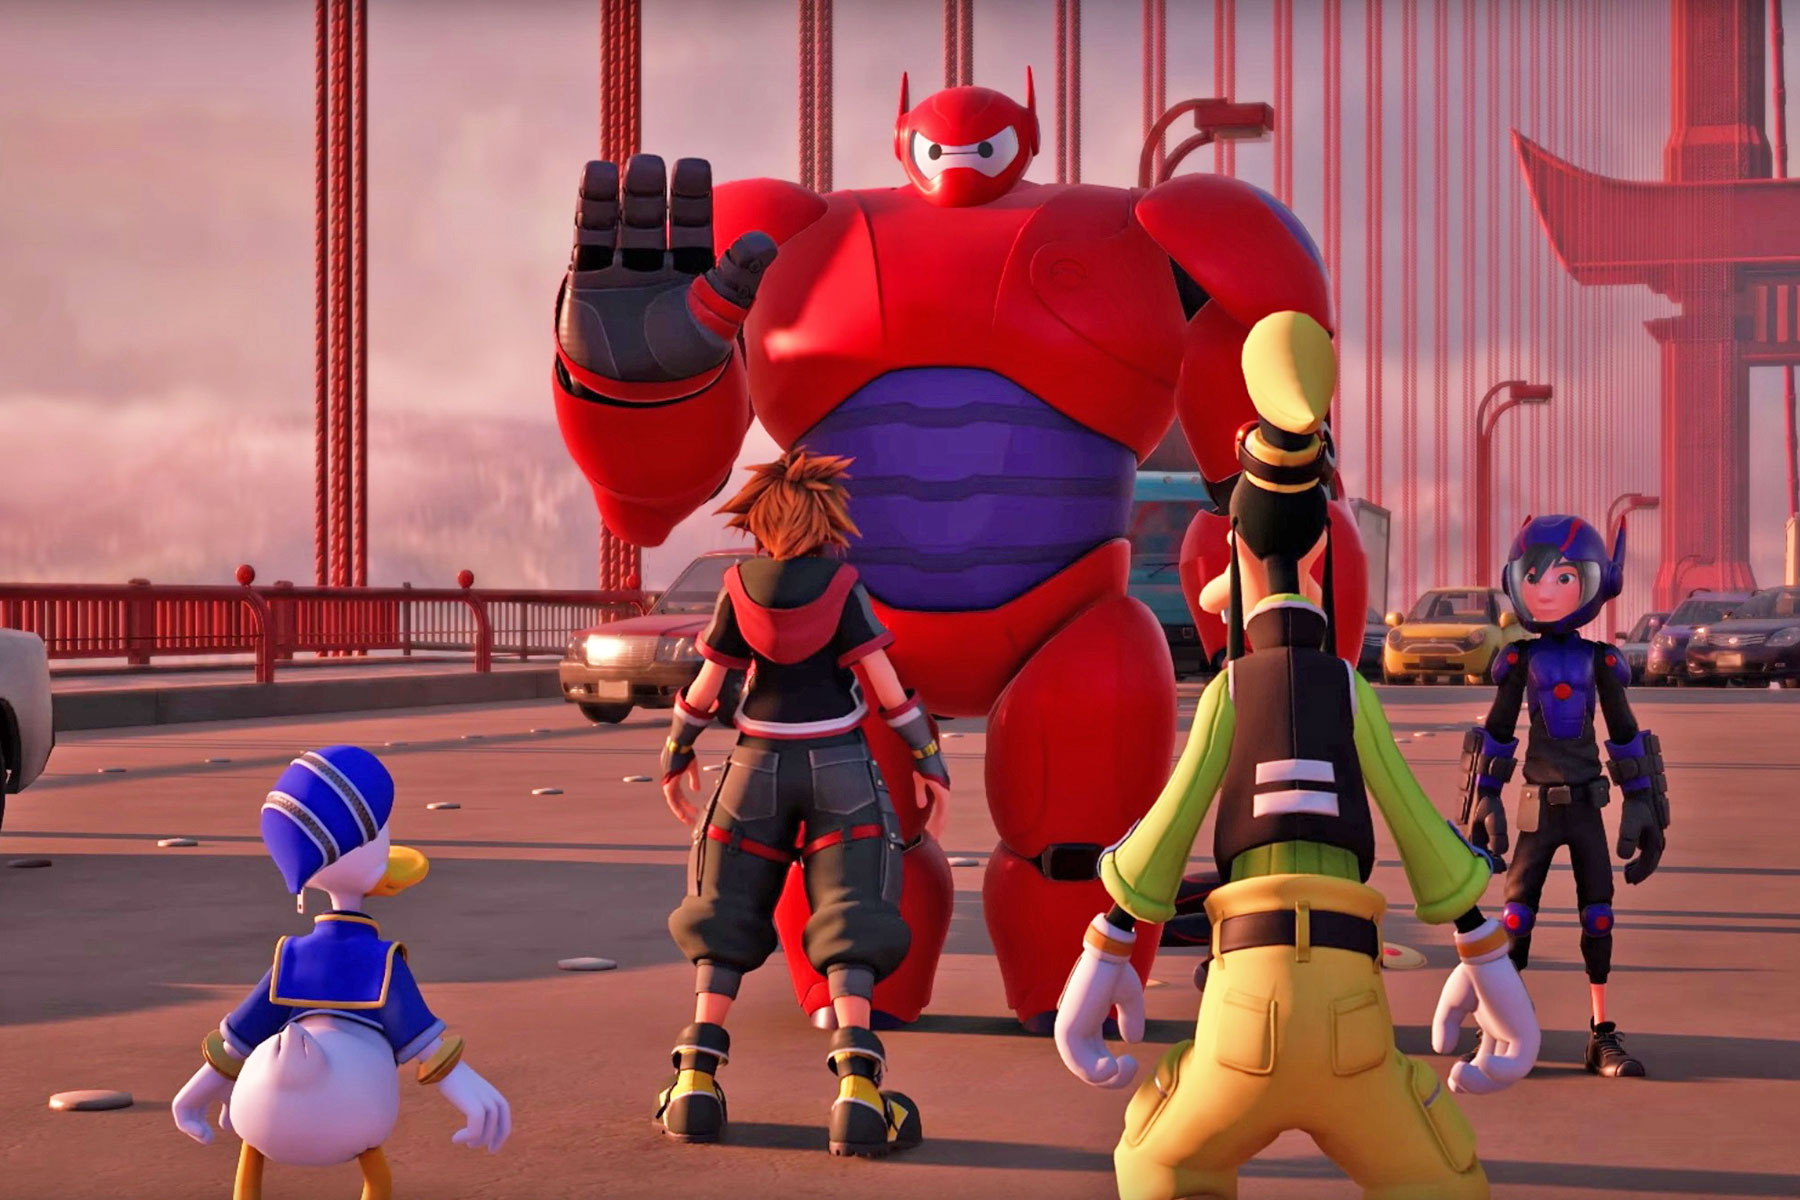 kingdom-hearts-3-how-to-get-all-trophies-and-achievements-guide